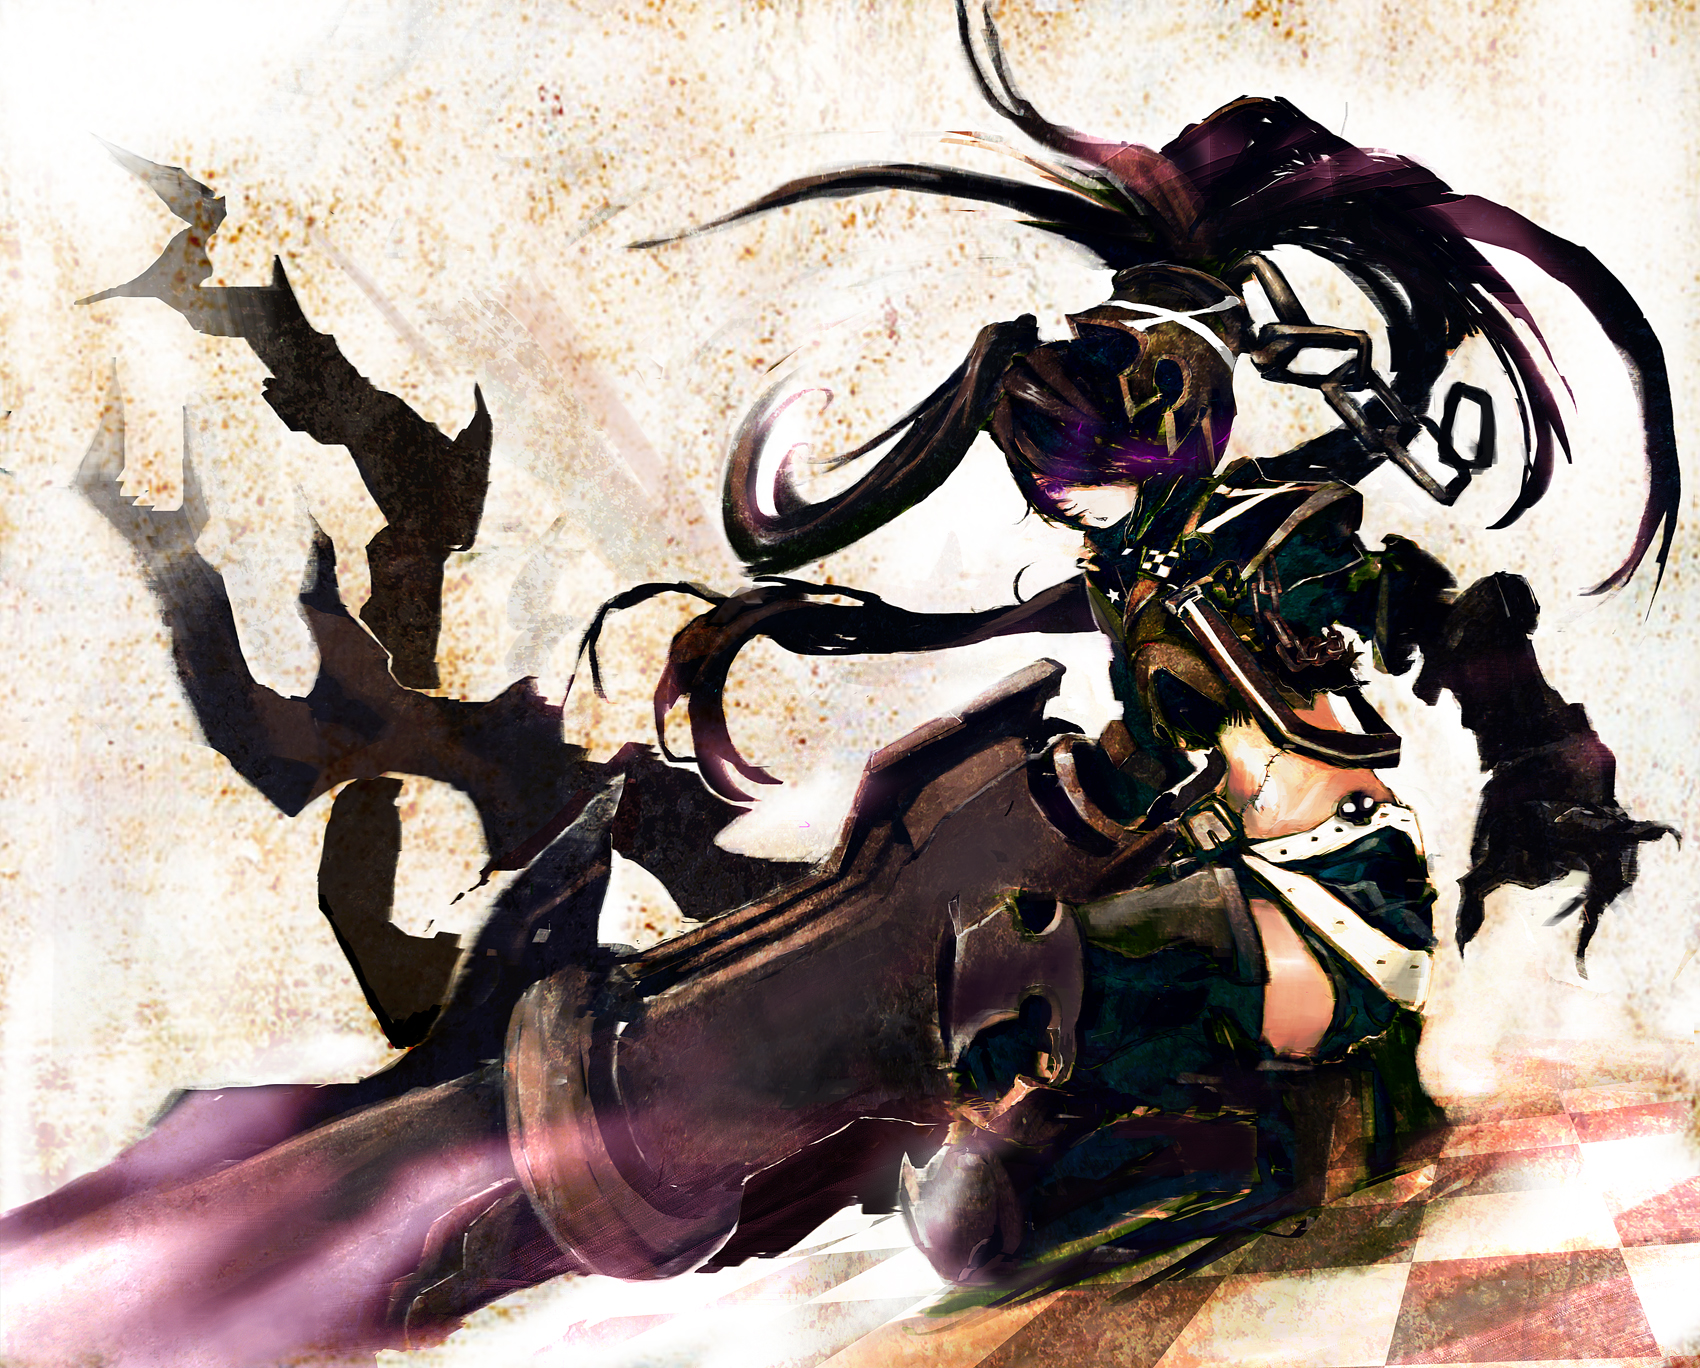 boots, Black, Rock, Shooter, Long, Hair, Belts, Weapons, Armor, Scars, Thigh, Highs, Twintails, Checkered, Navel, Squatting, Shorts, Chains, Purple, Eyes, Anime, Girls, Insane, Black, Rock, Shooter, Gauntlets, H Wallpaper